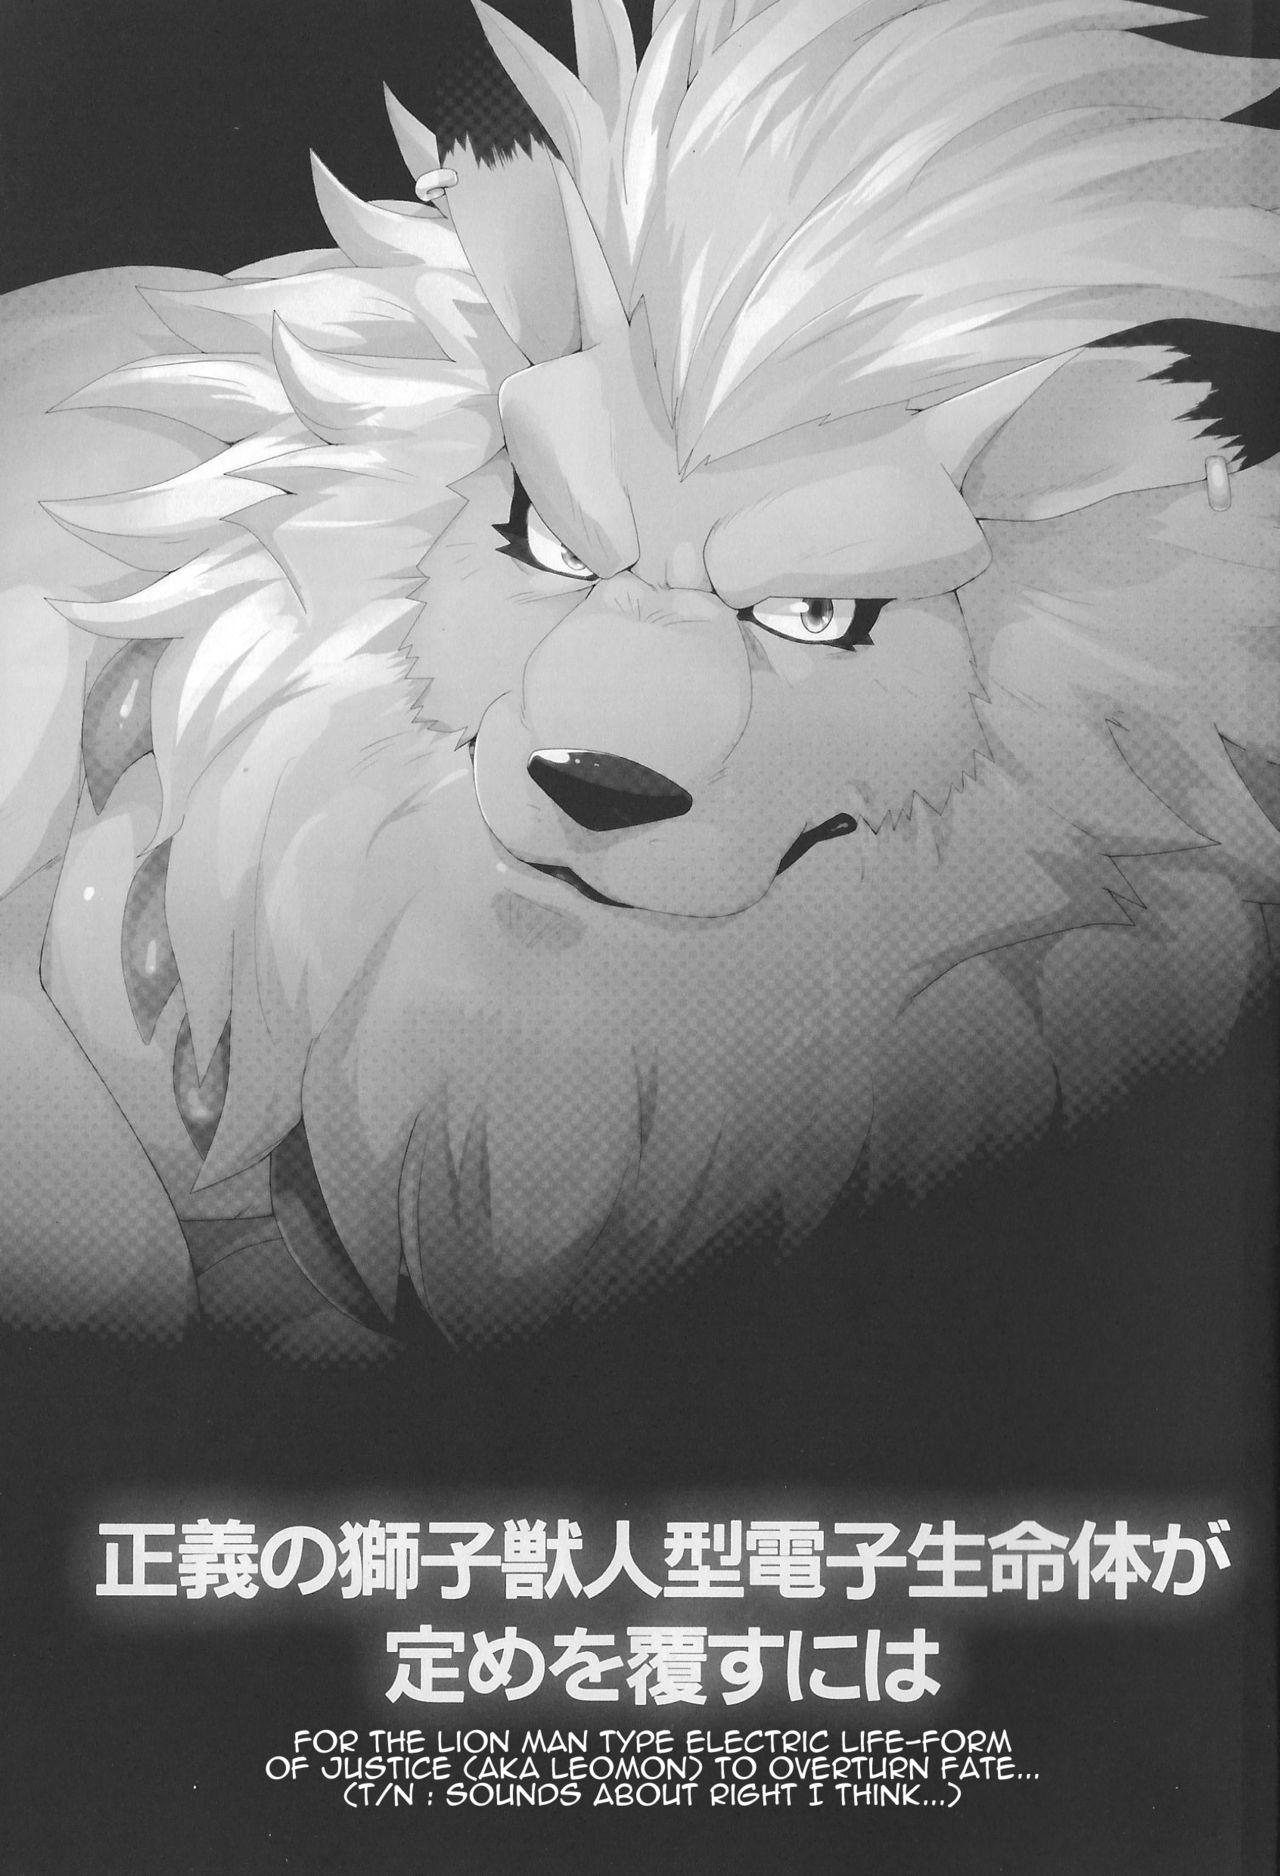 [Debirobu] For the Lion-Man Type Electric Life Form to Overturn Fate - Leomon Doujin [ENG] 2